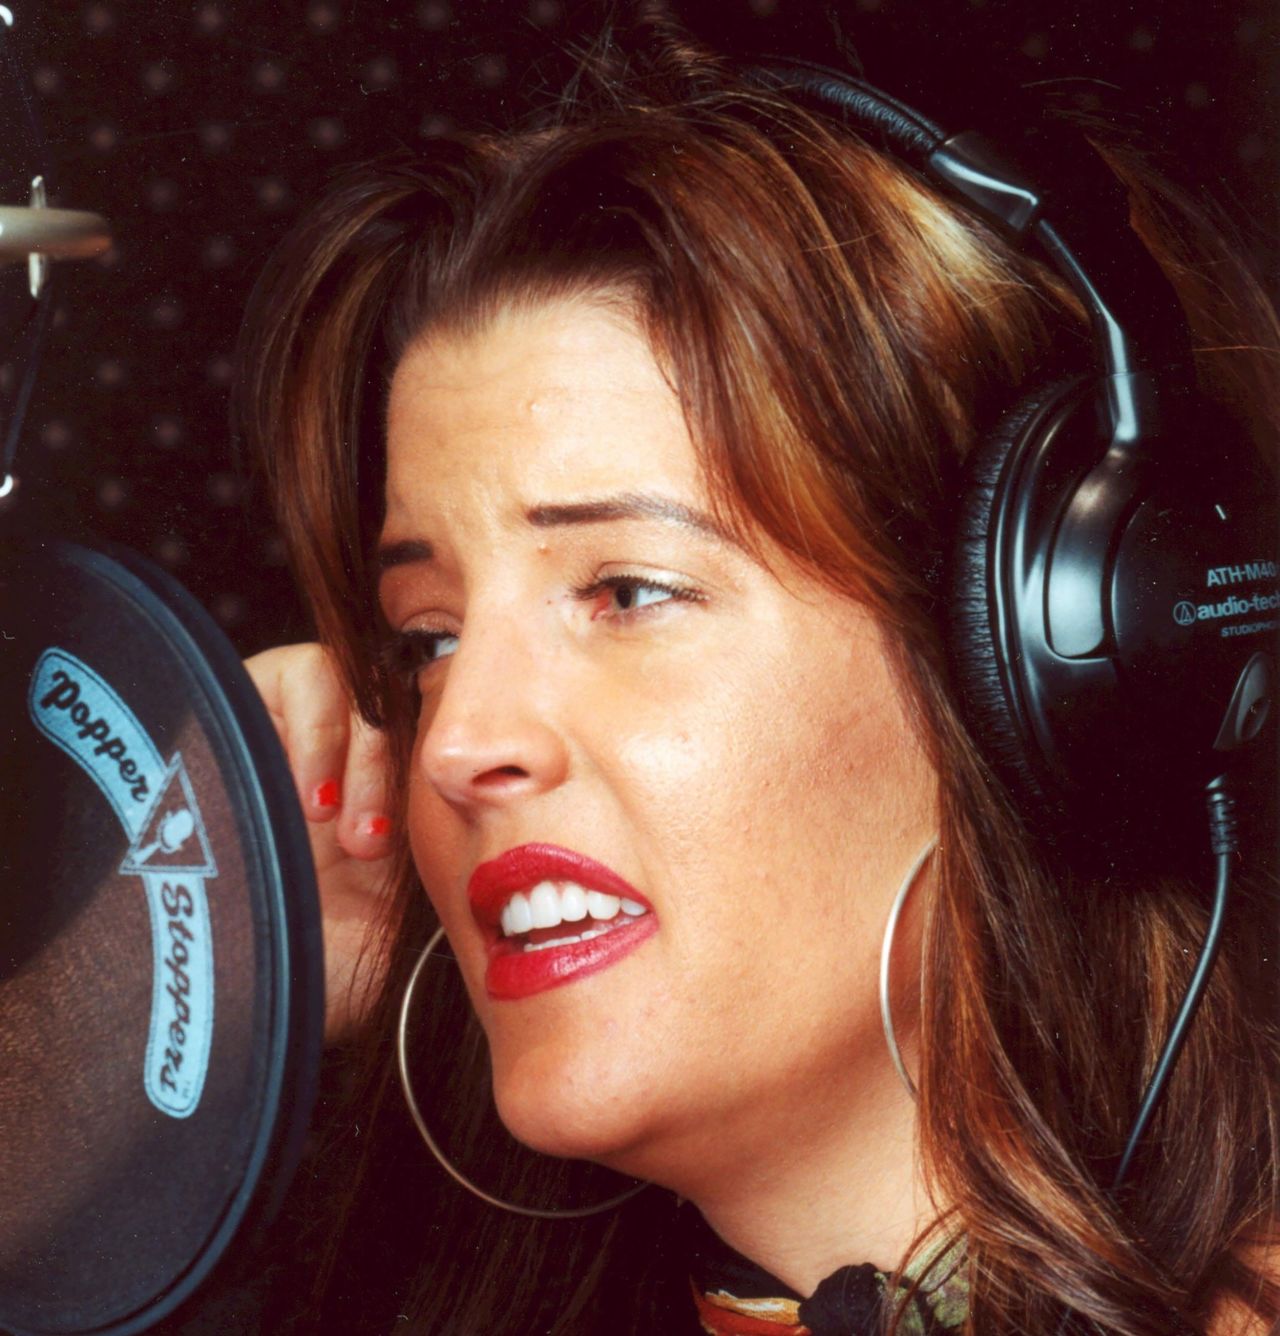 Presley works in the studio in 2000 on her debut album, "To Whom It May Concern," which reached No. 5 on the Billboard 200 albums chart and was certified gold.